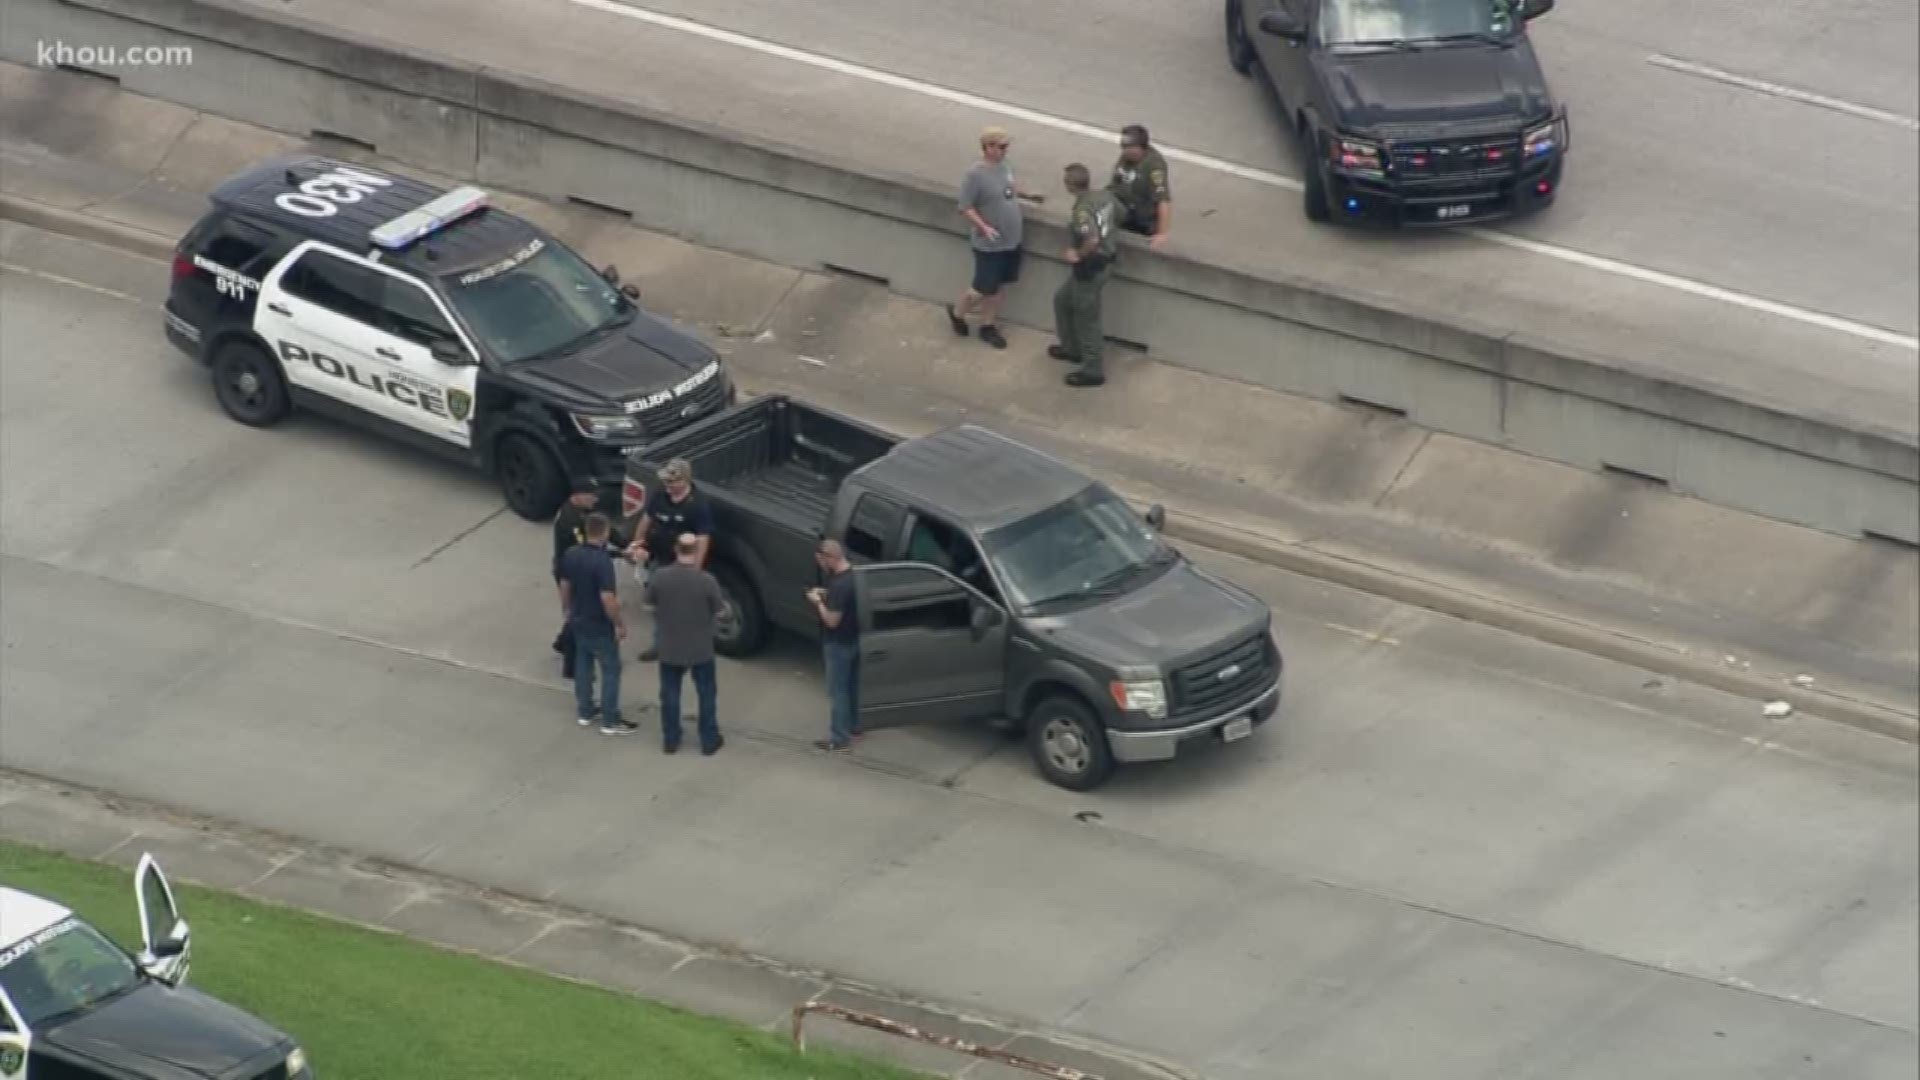 Highspeed police chase ends on Gulf Freeway service road near Broadway